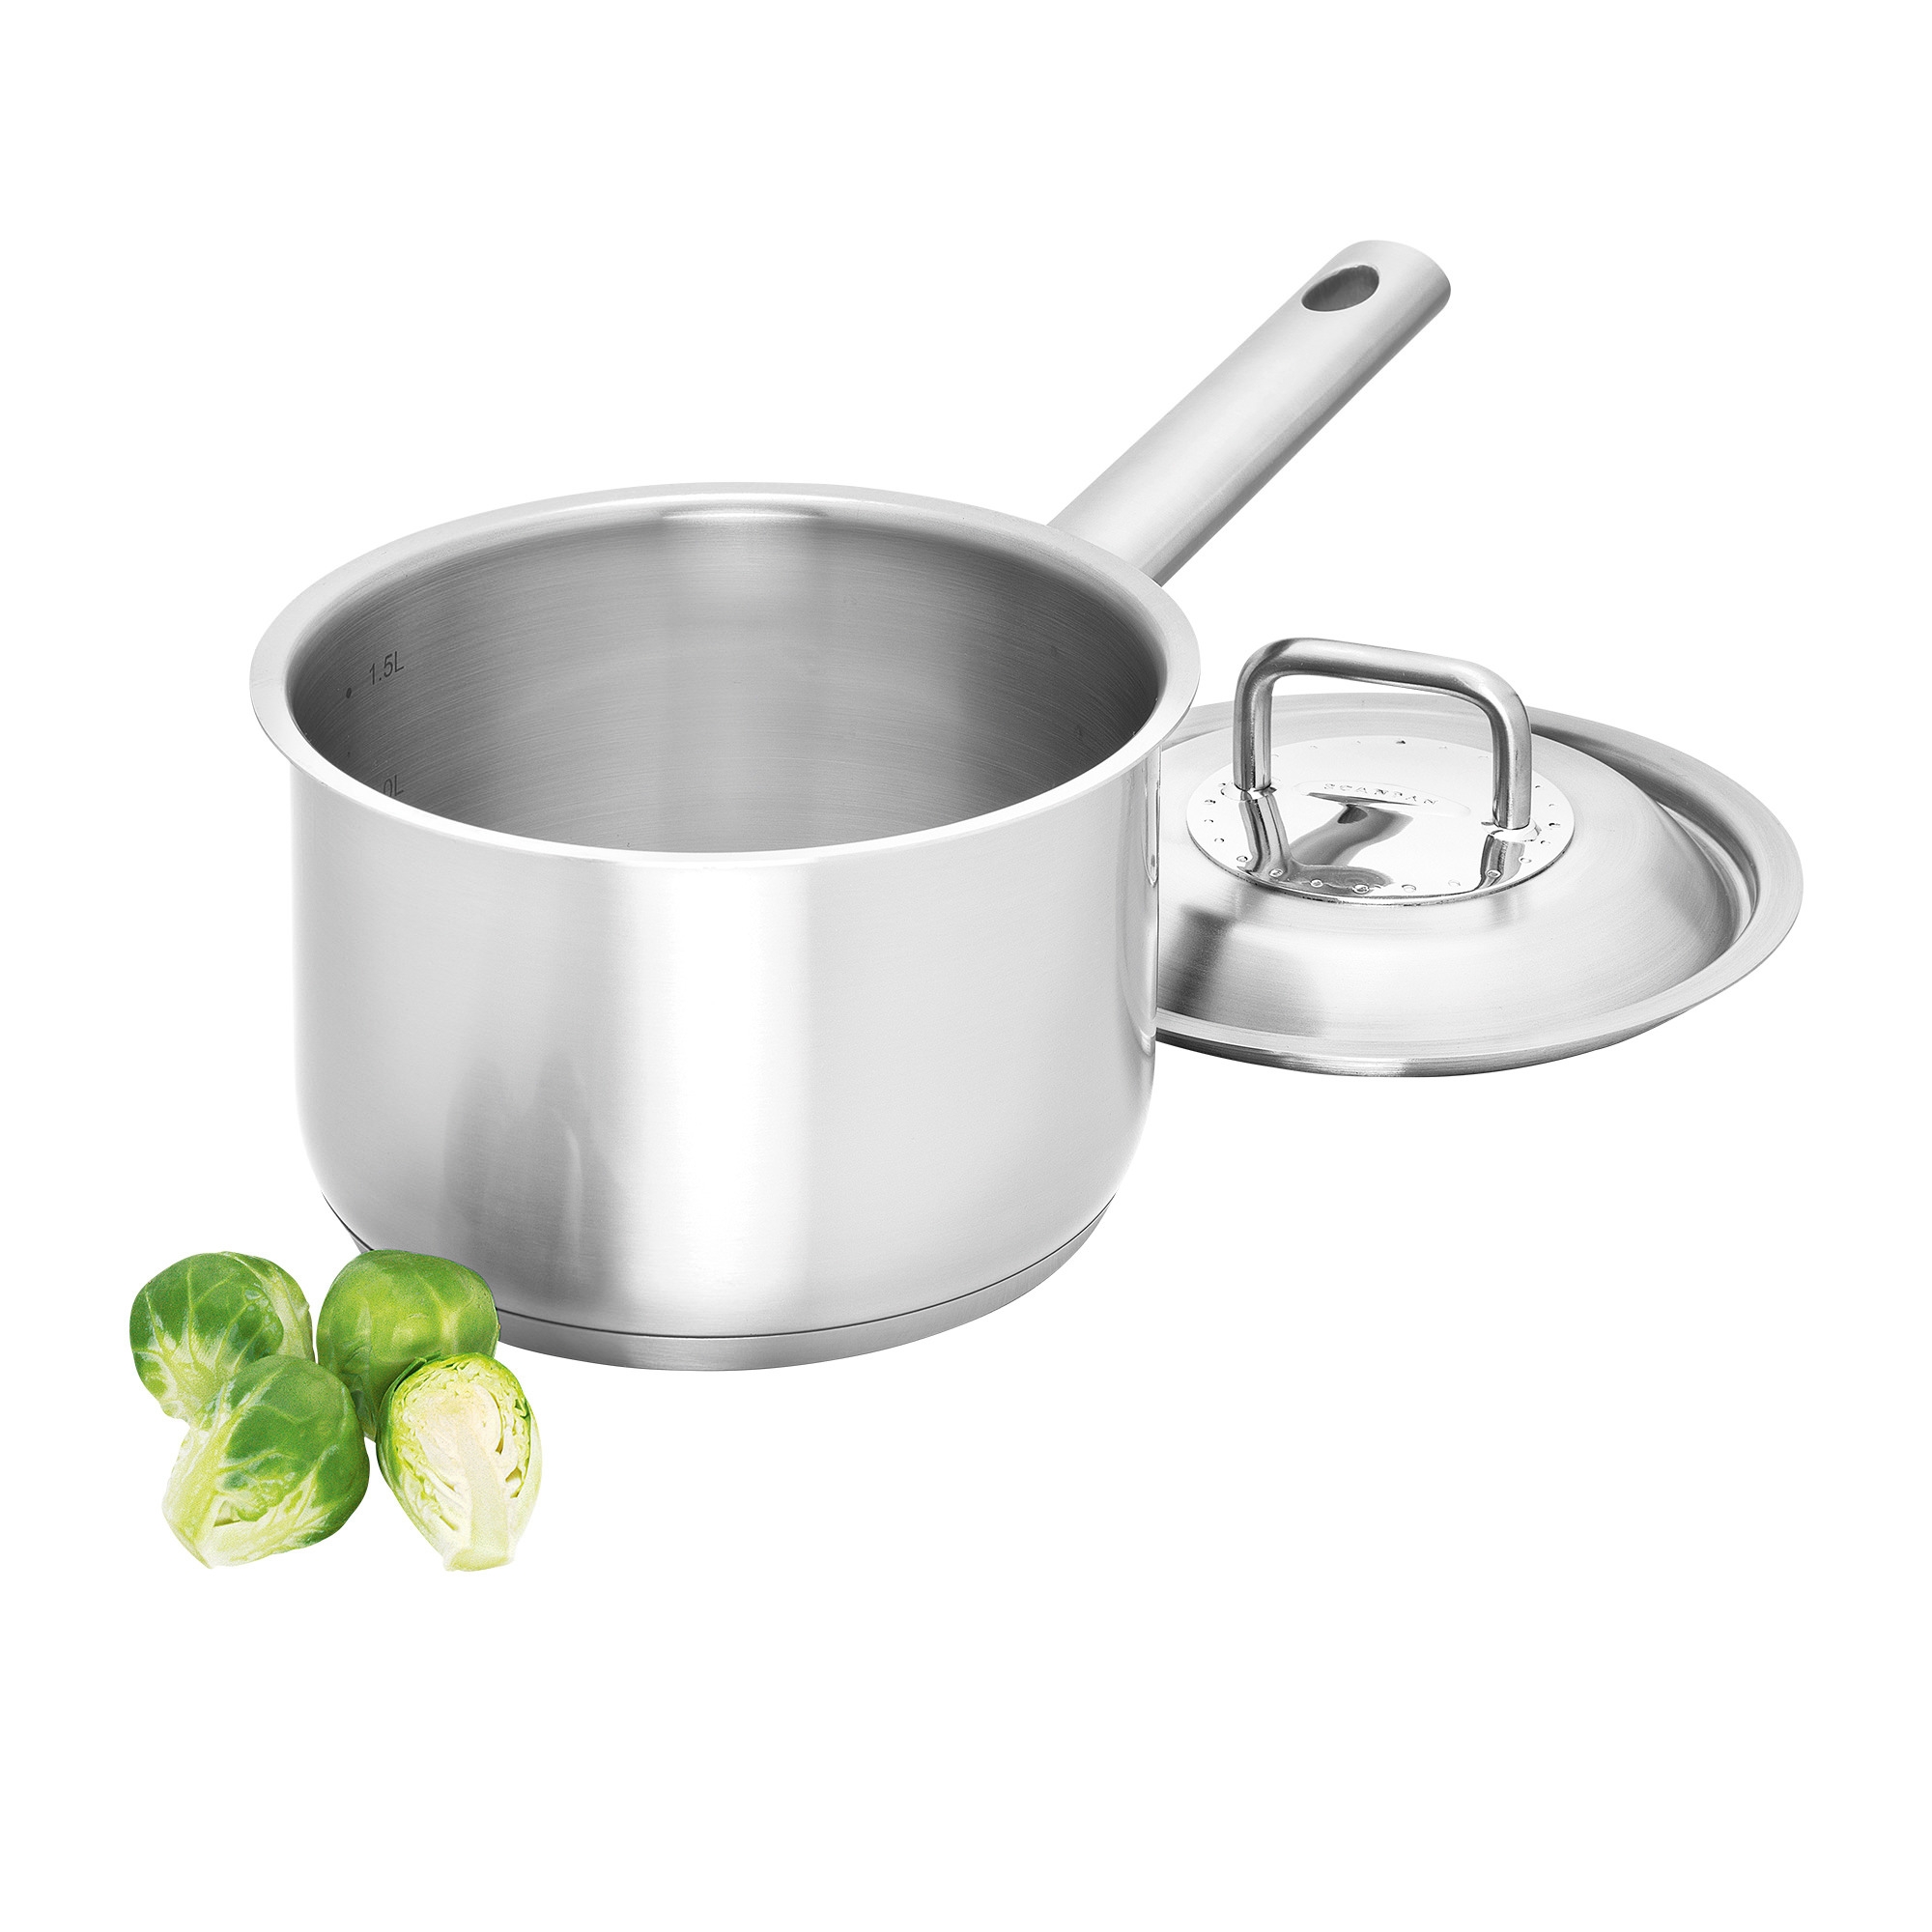 Scanpan Commercial Stainless Steel Covered Saucepan 16cm - 1.8L Image 2